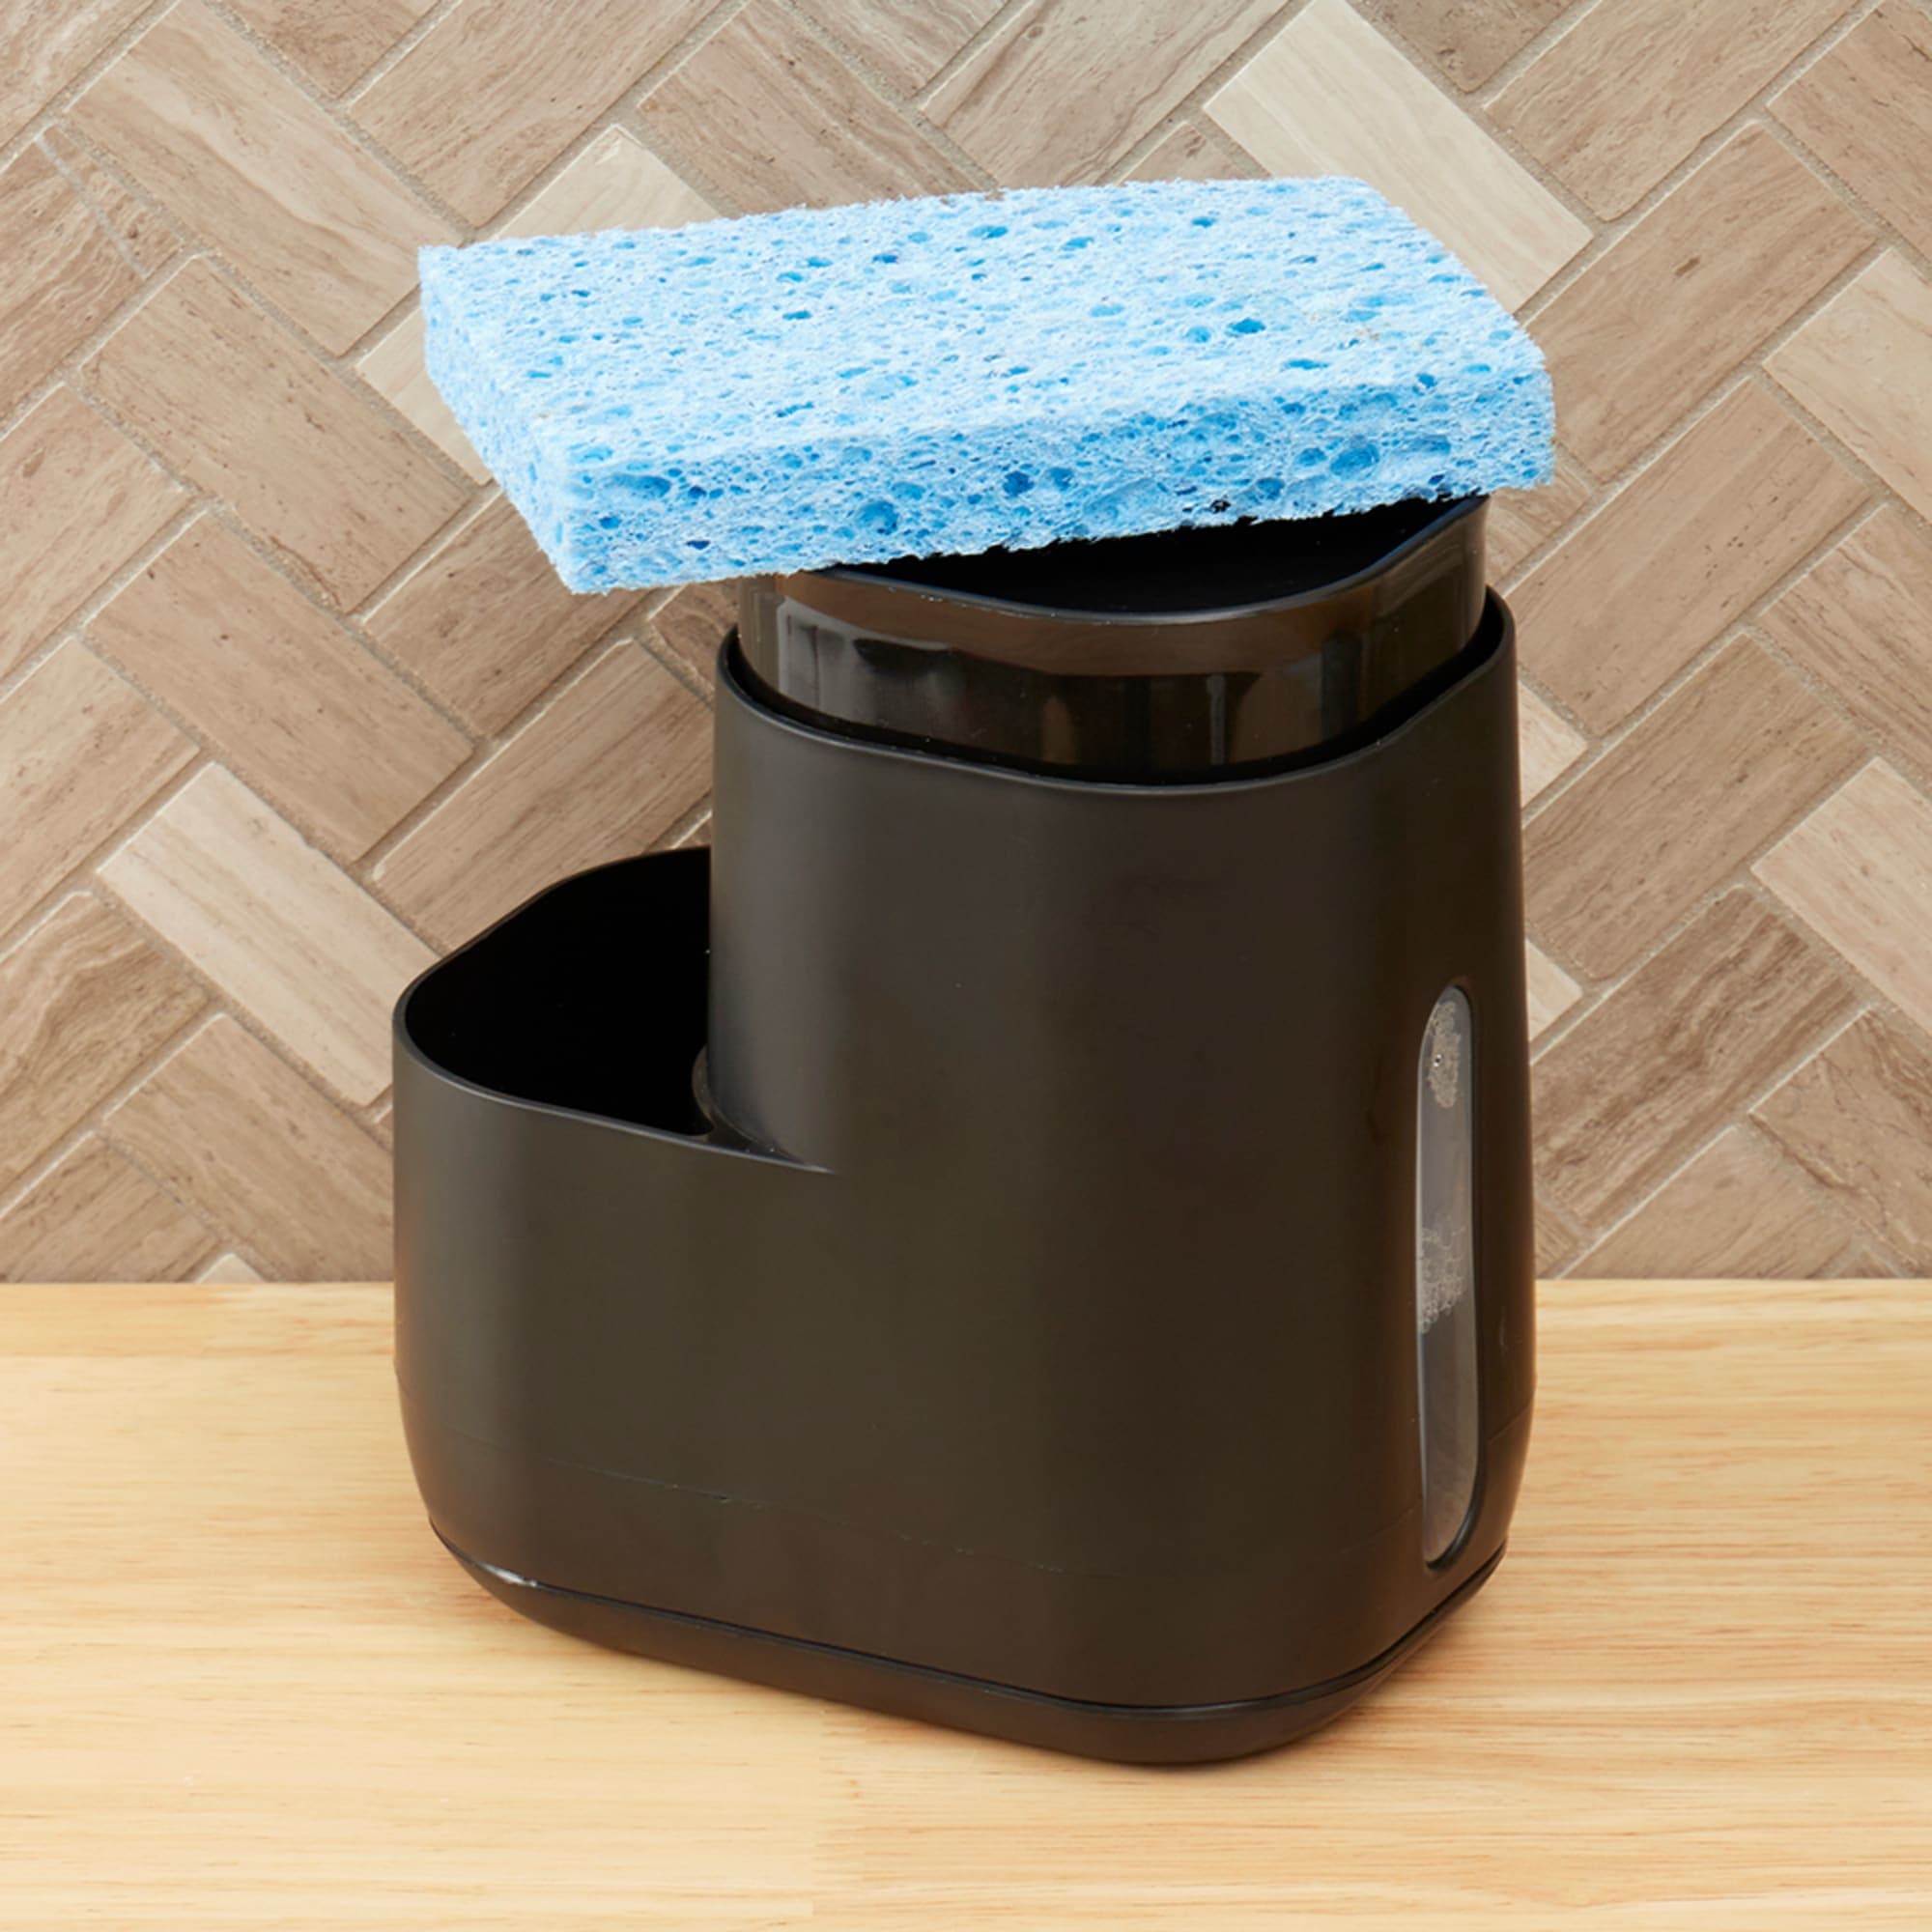 Home Basics Soap Dispenser with Side Sponge Compartment $4.00 EACH, CASE PACK OF 12